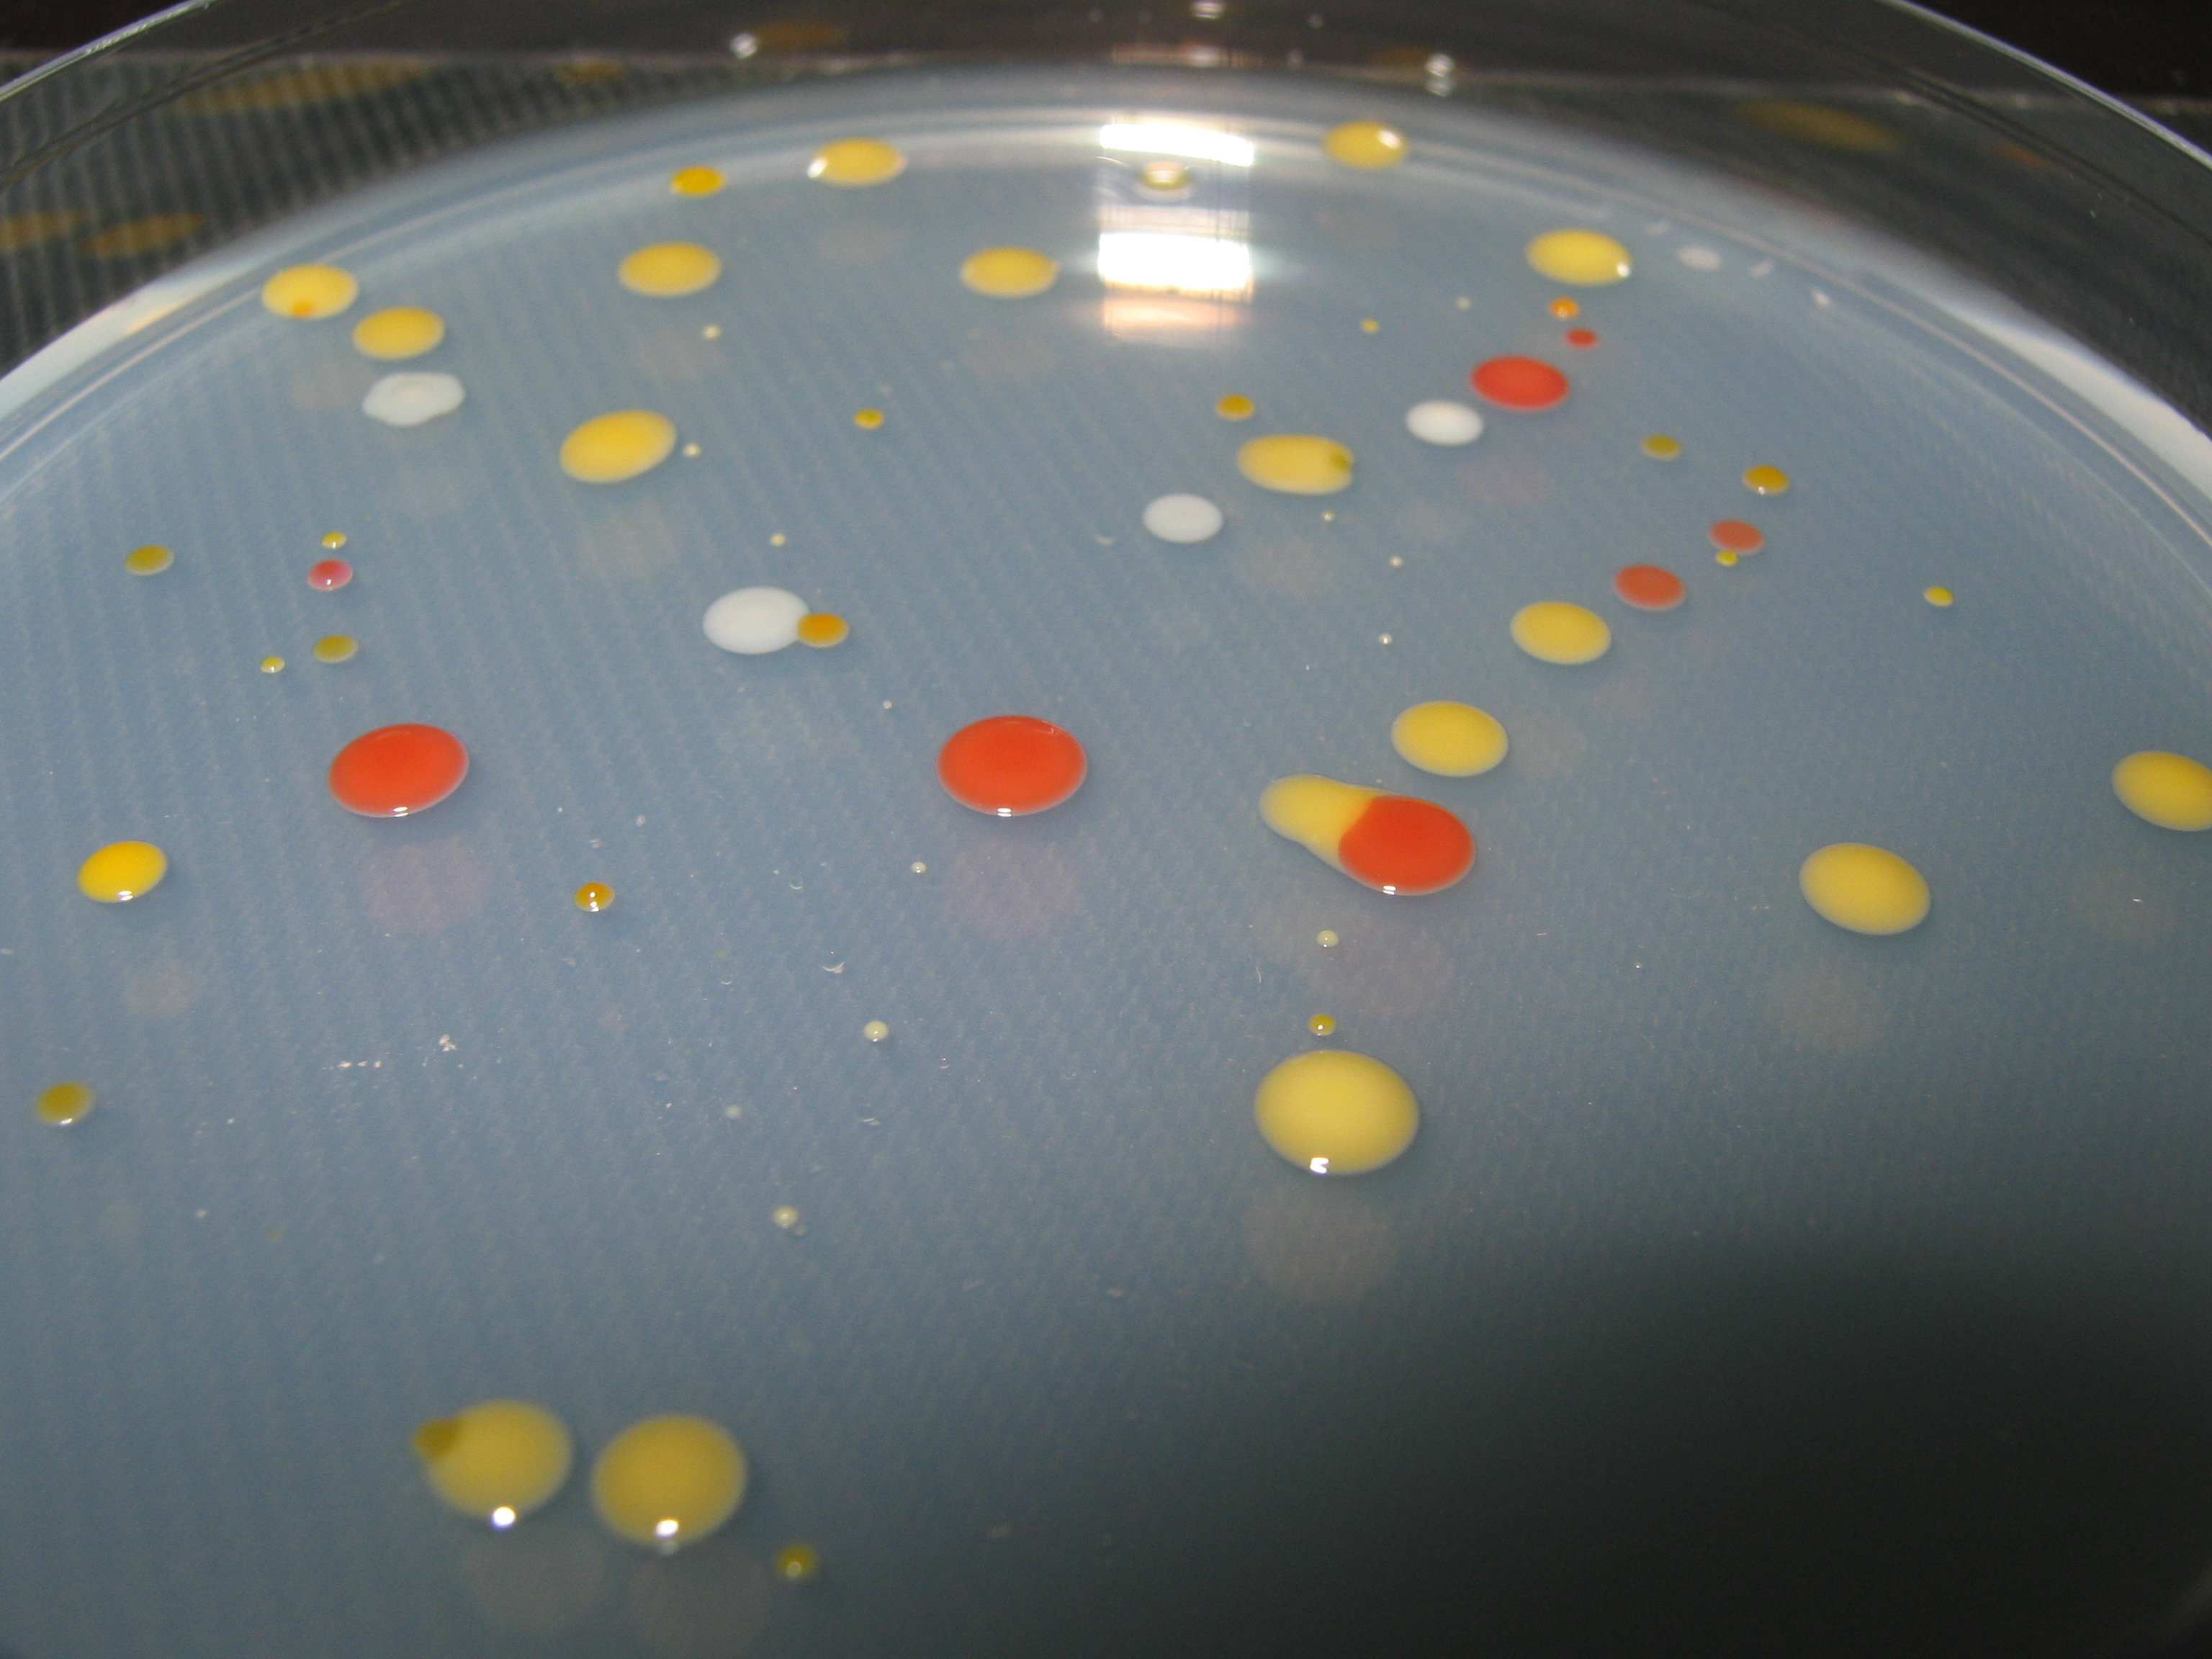 Culture of bacteria from cloud water (Credit: P. Amato)